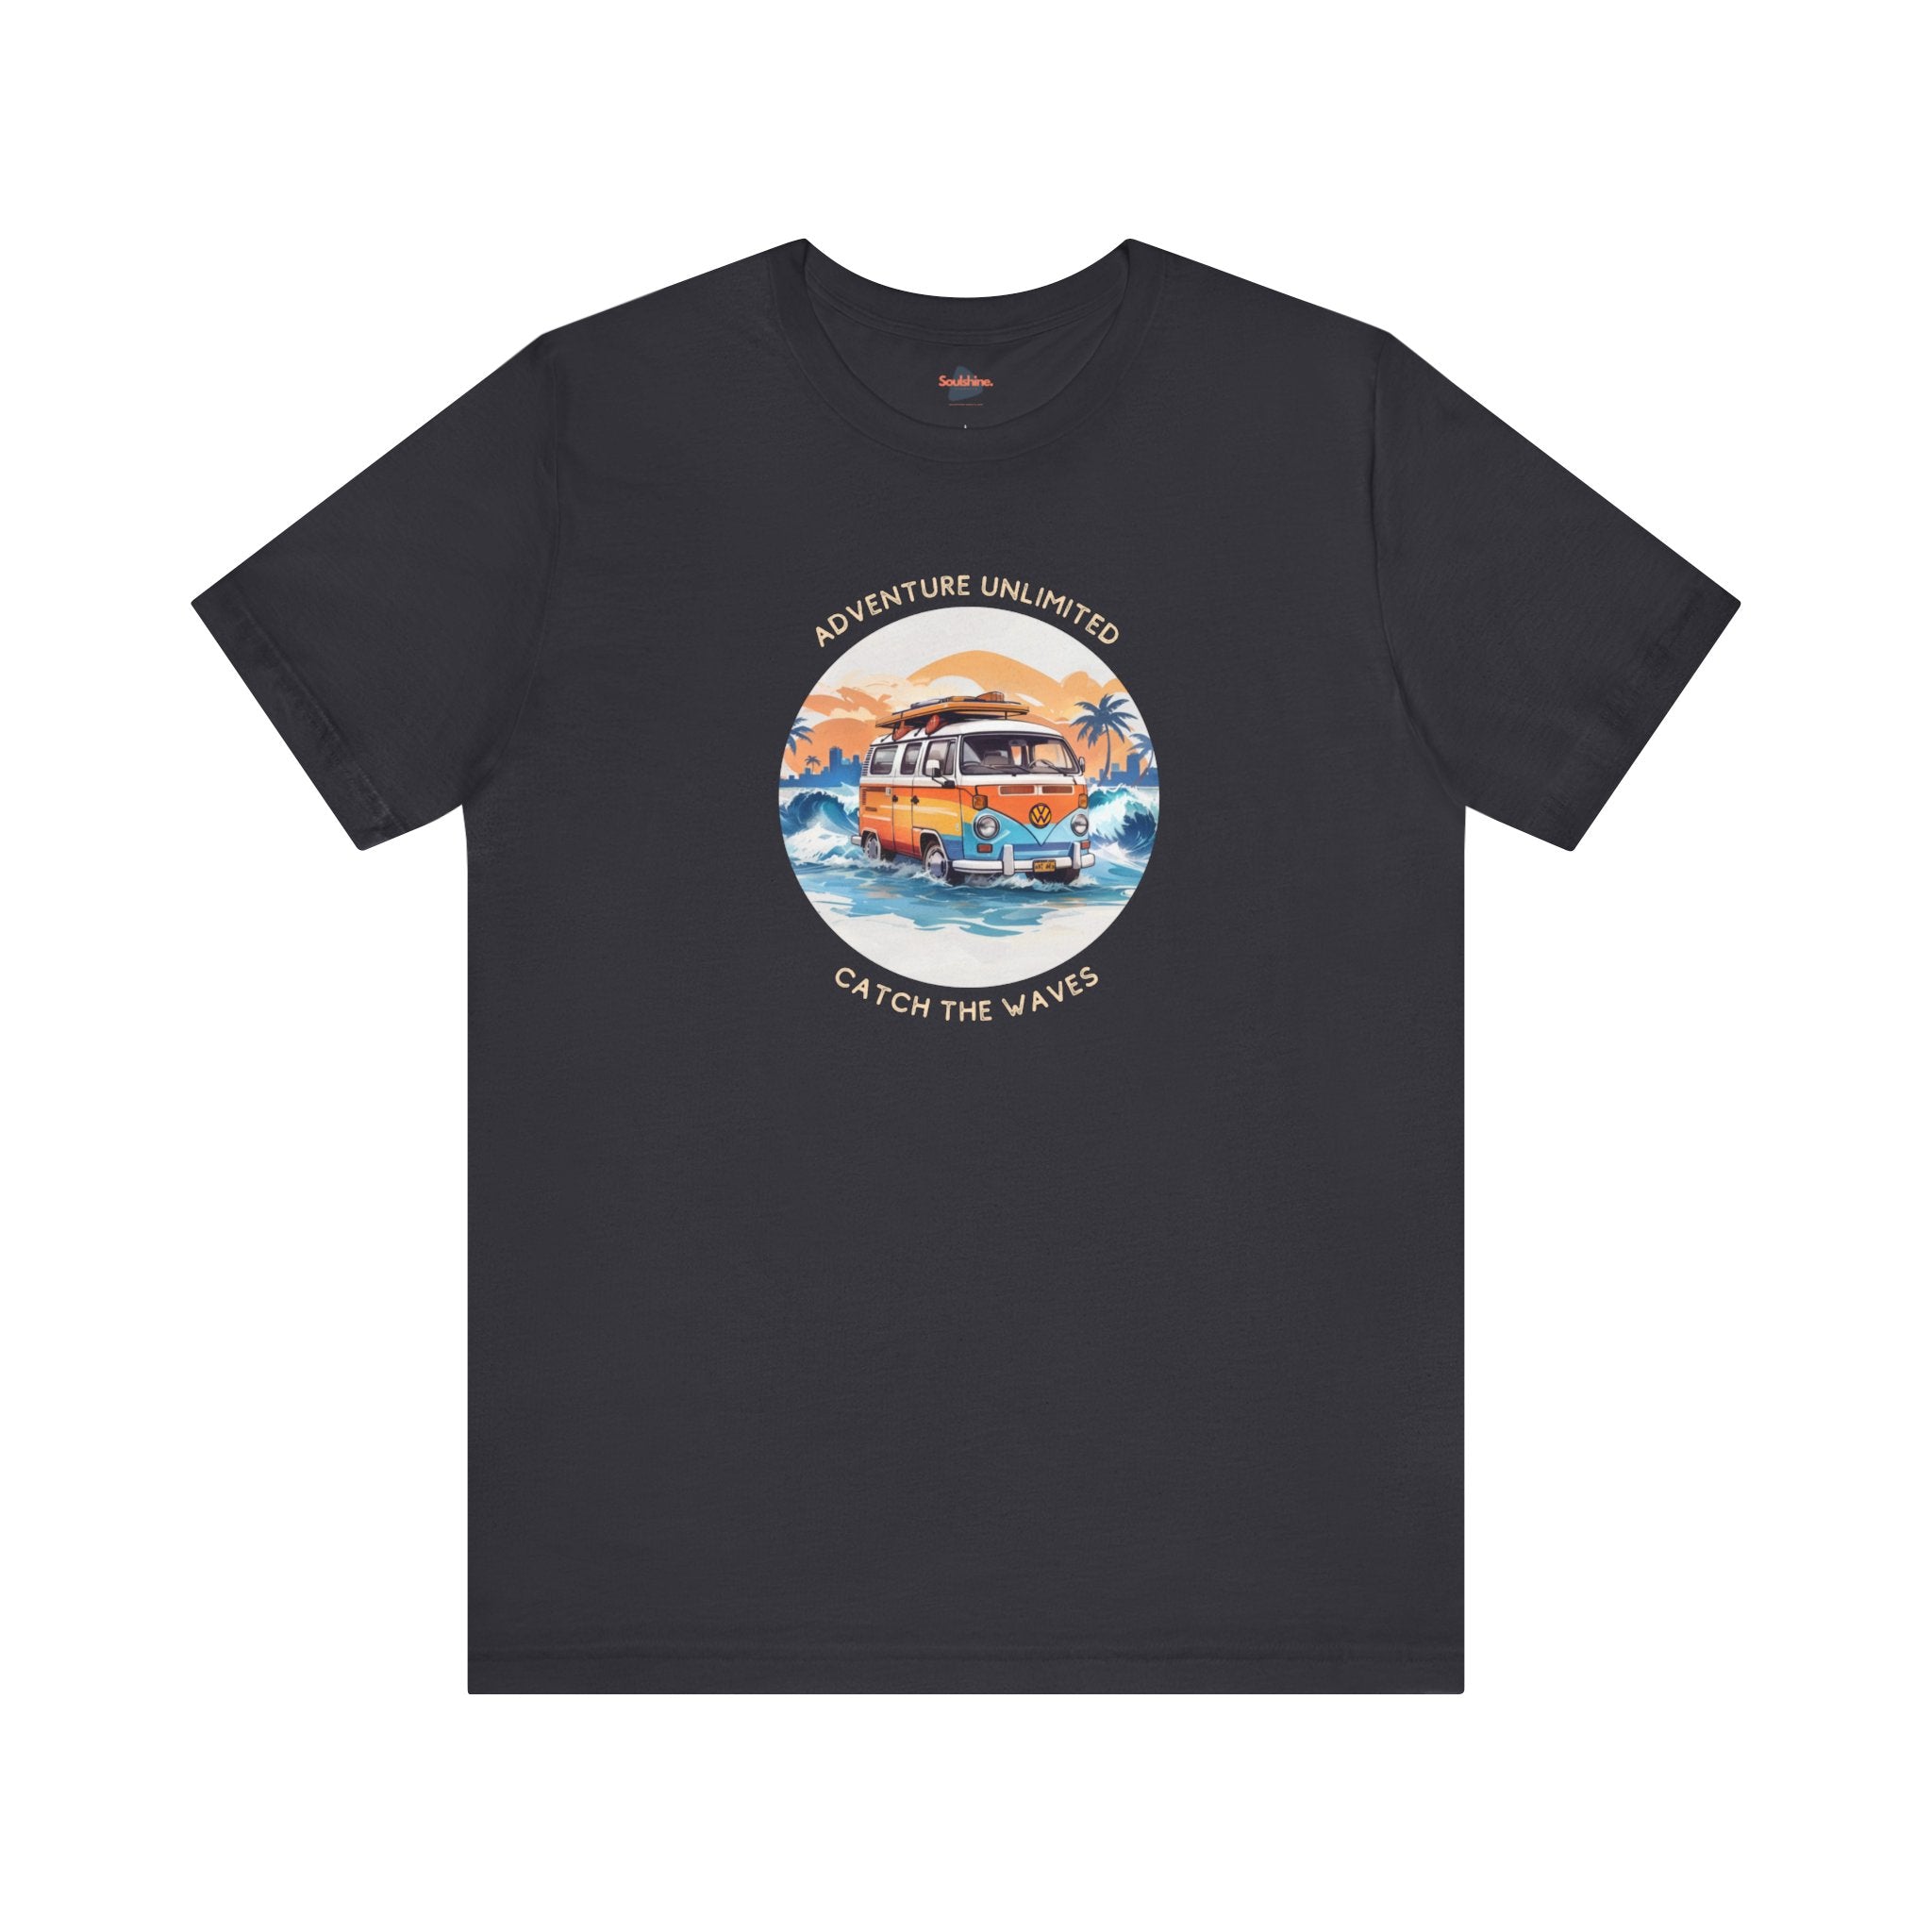 Adventure Unlimited black t-shirt with ’on the water’ printed - Unisex Jersey Short Sleeve Tee - US